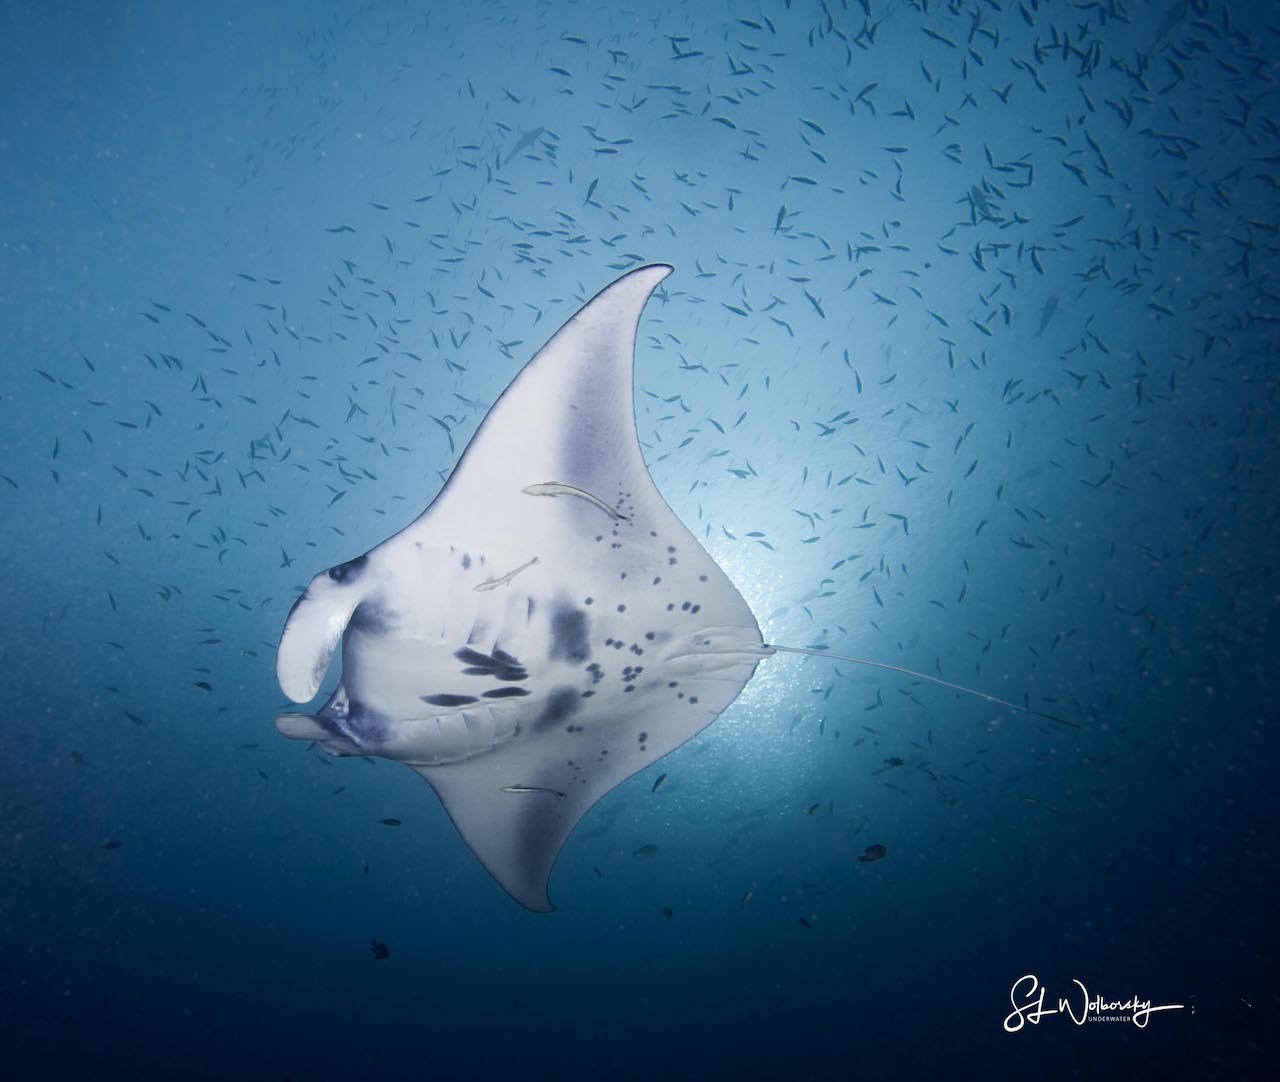 Manta Ray at German Channel by Stephen Wolborsky